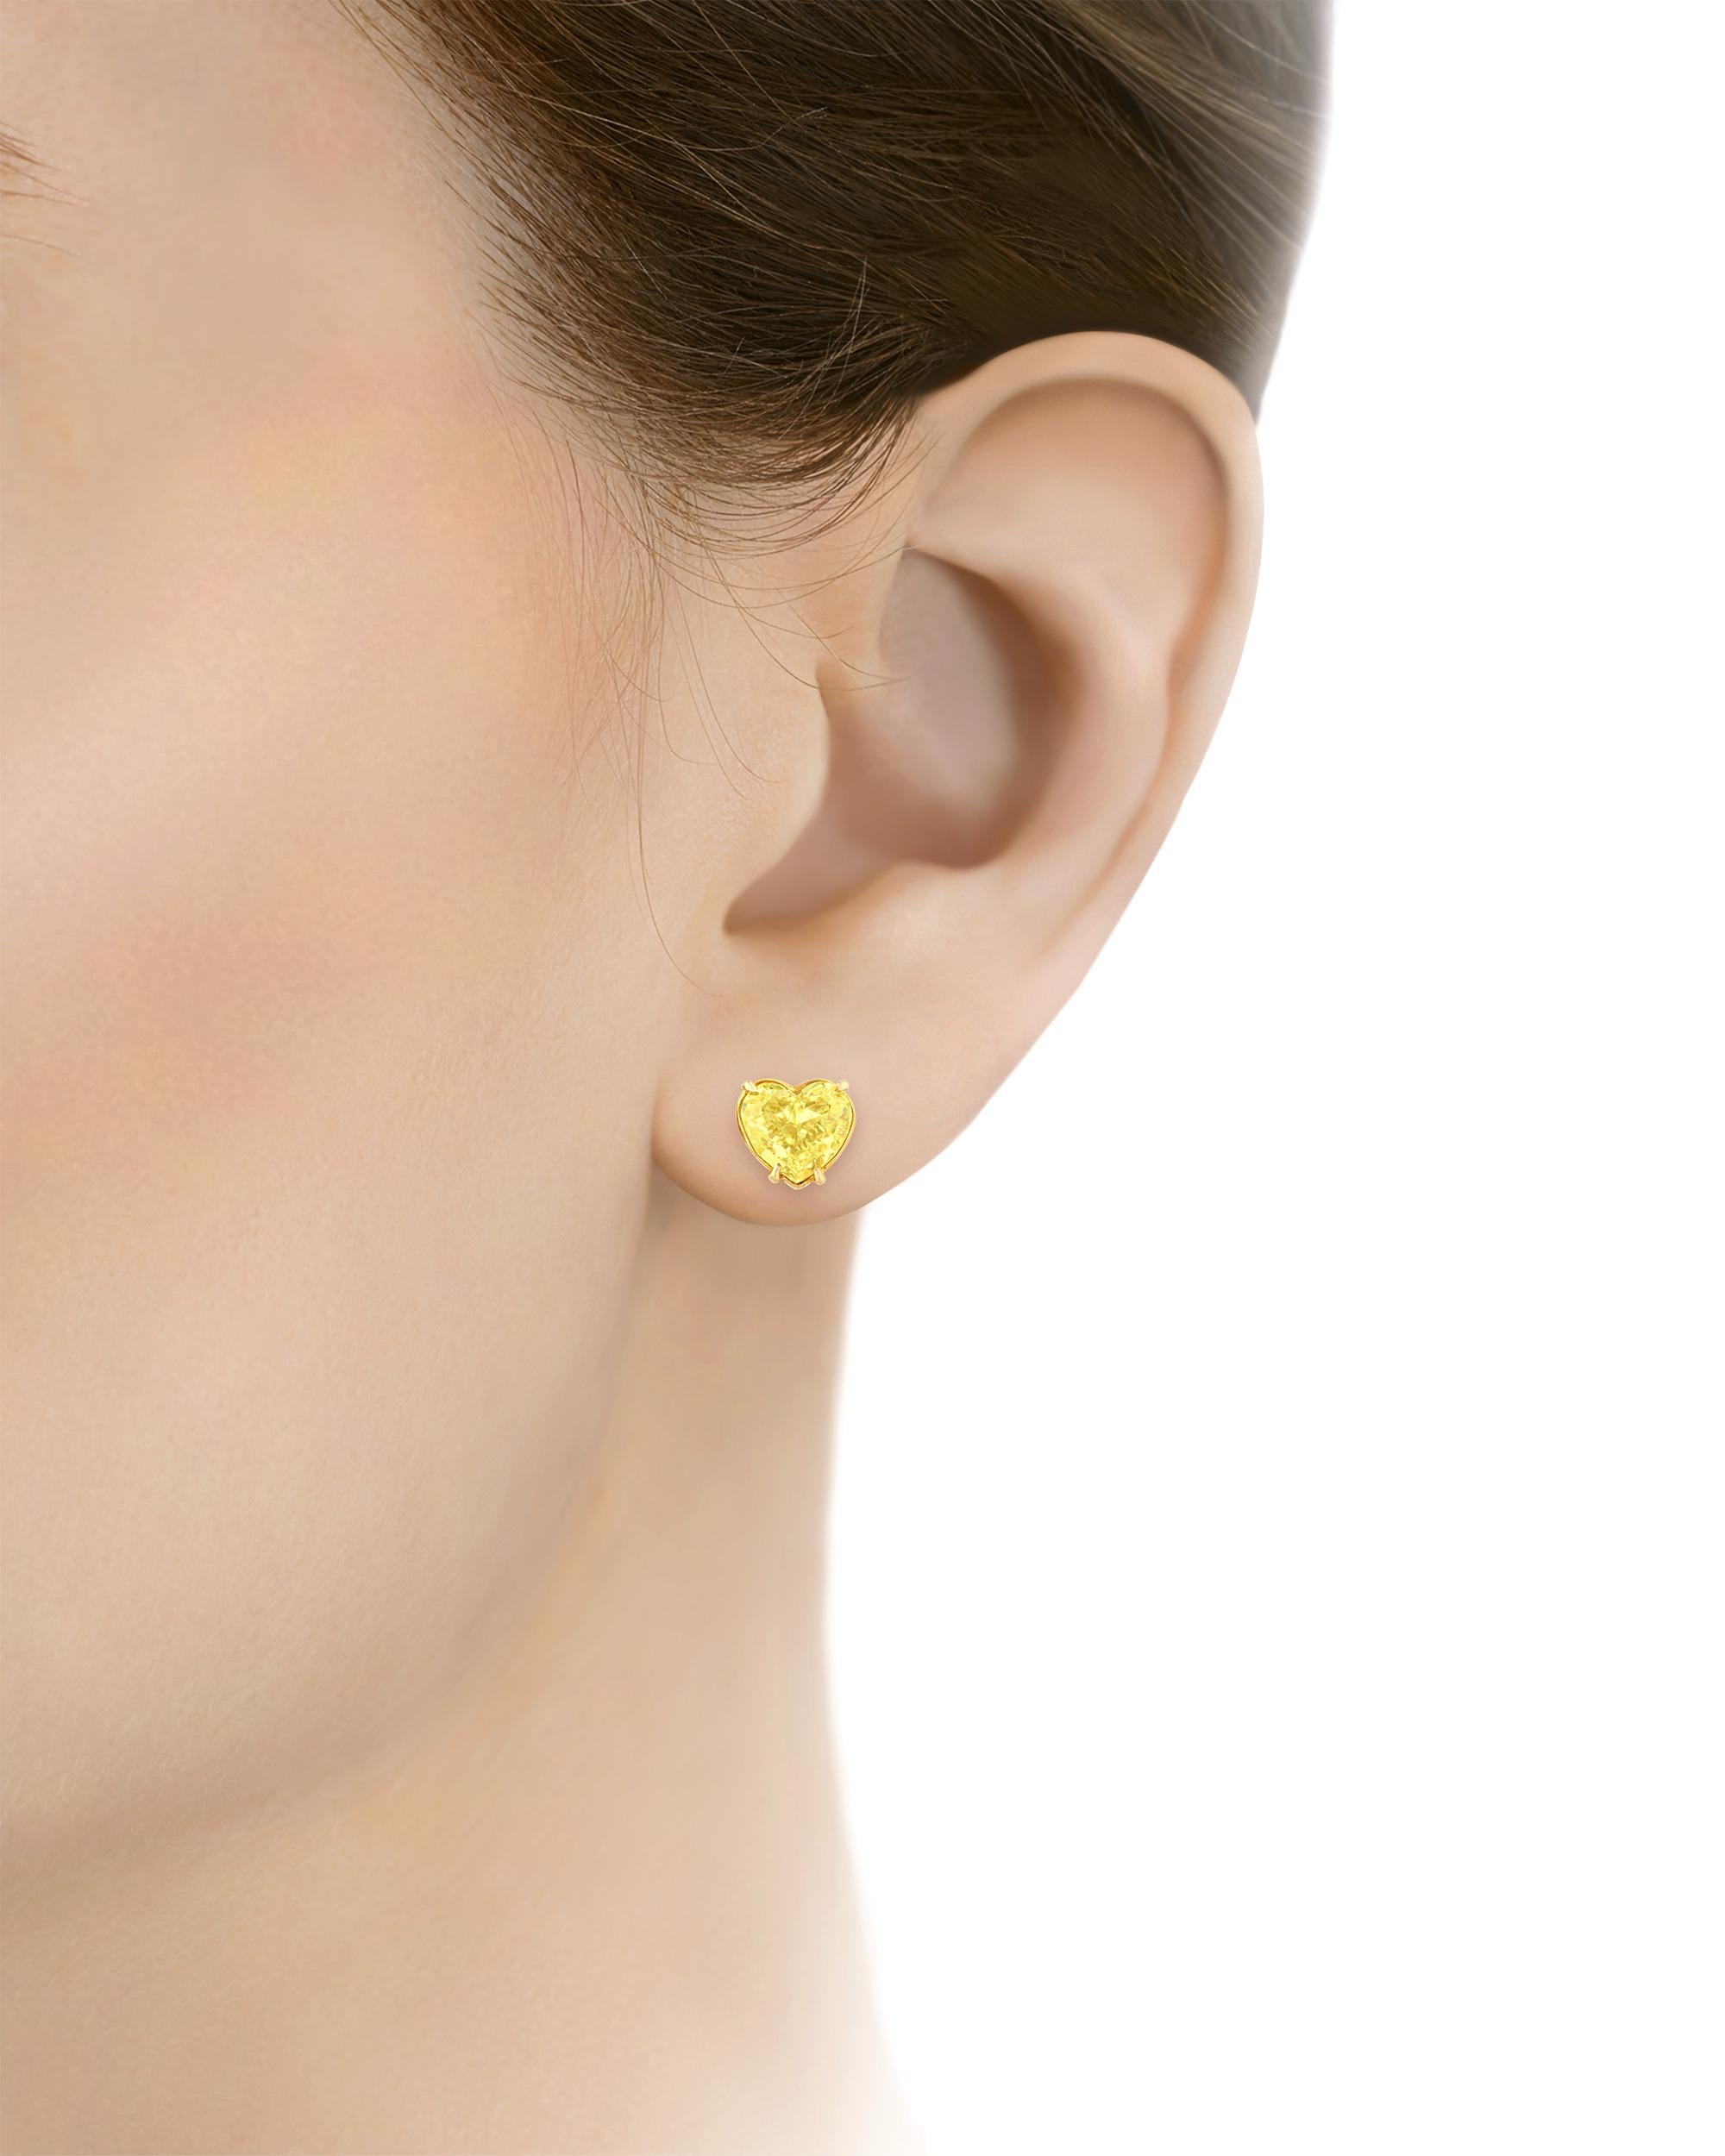 This exquisite pair of earrings features two superb fancy light yellow diamonds faceted into enchanting heart shapes. These earrings marry exquisite rarity with refined design. Showcasing even color distribution and totaling 4.21 carats, these fancy